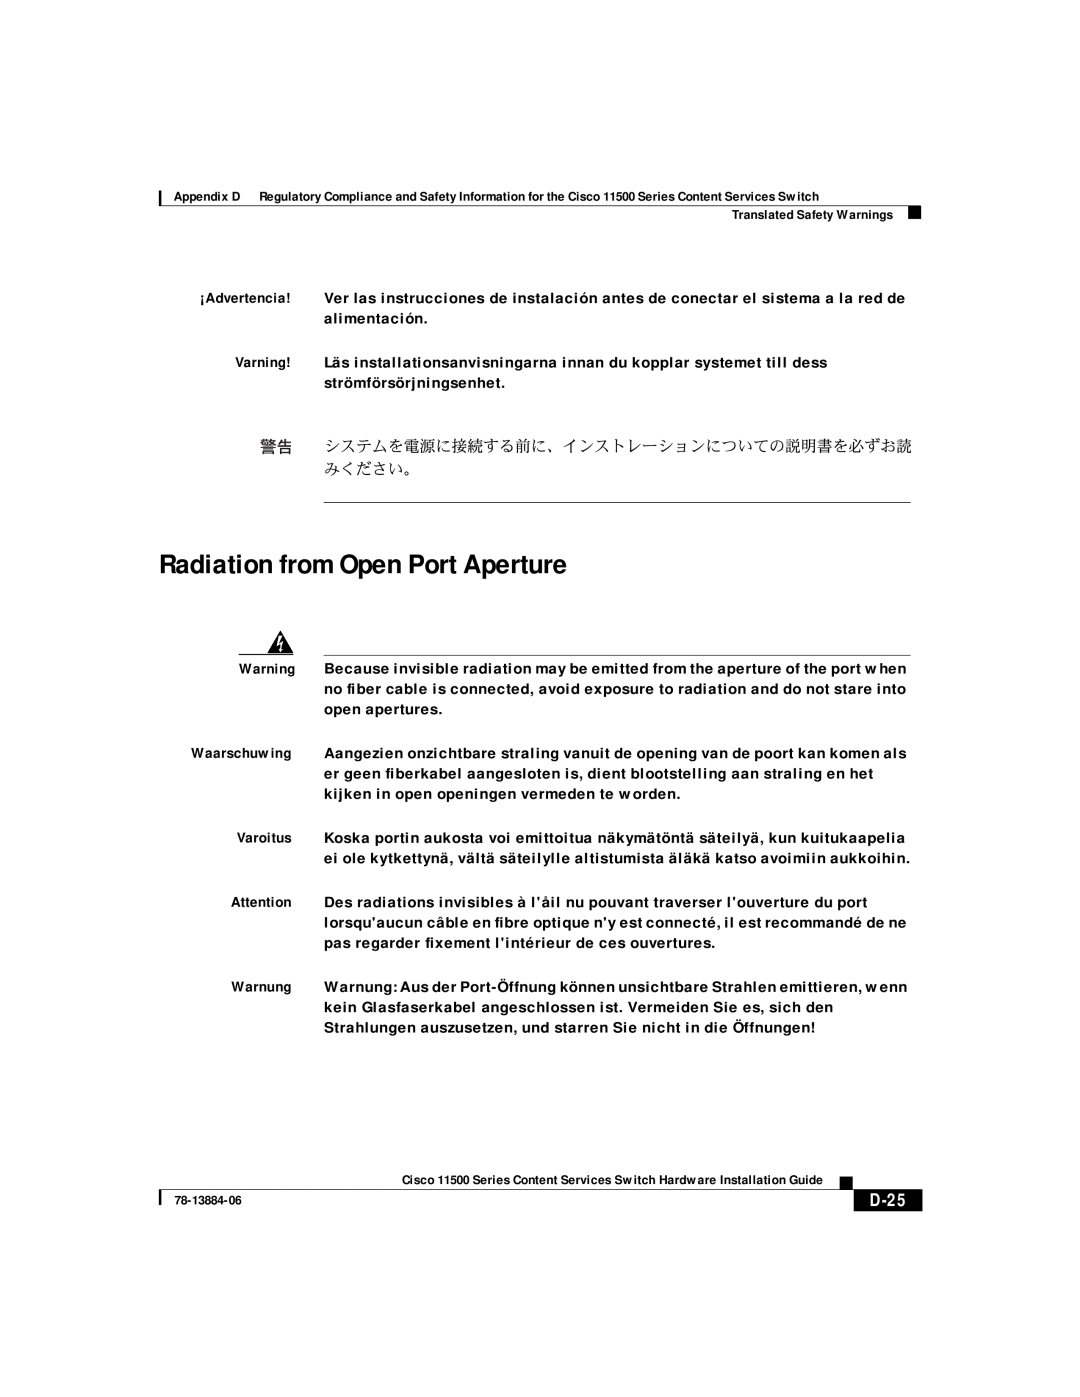 Cisco Systems 11503, 11506, 11501, 11500 appendix Radiation from Open Port Aperture, D-25 